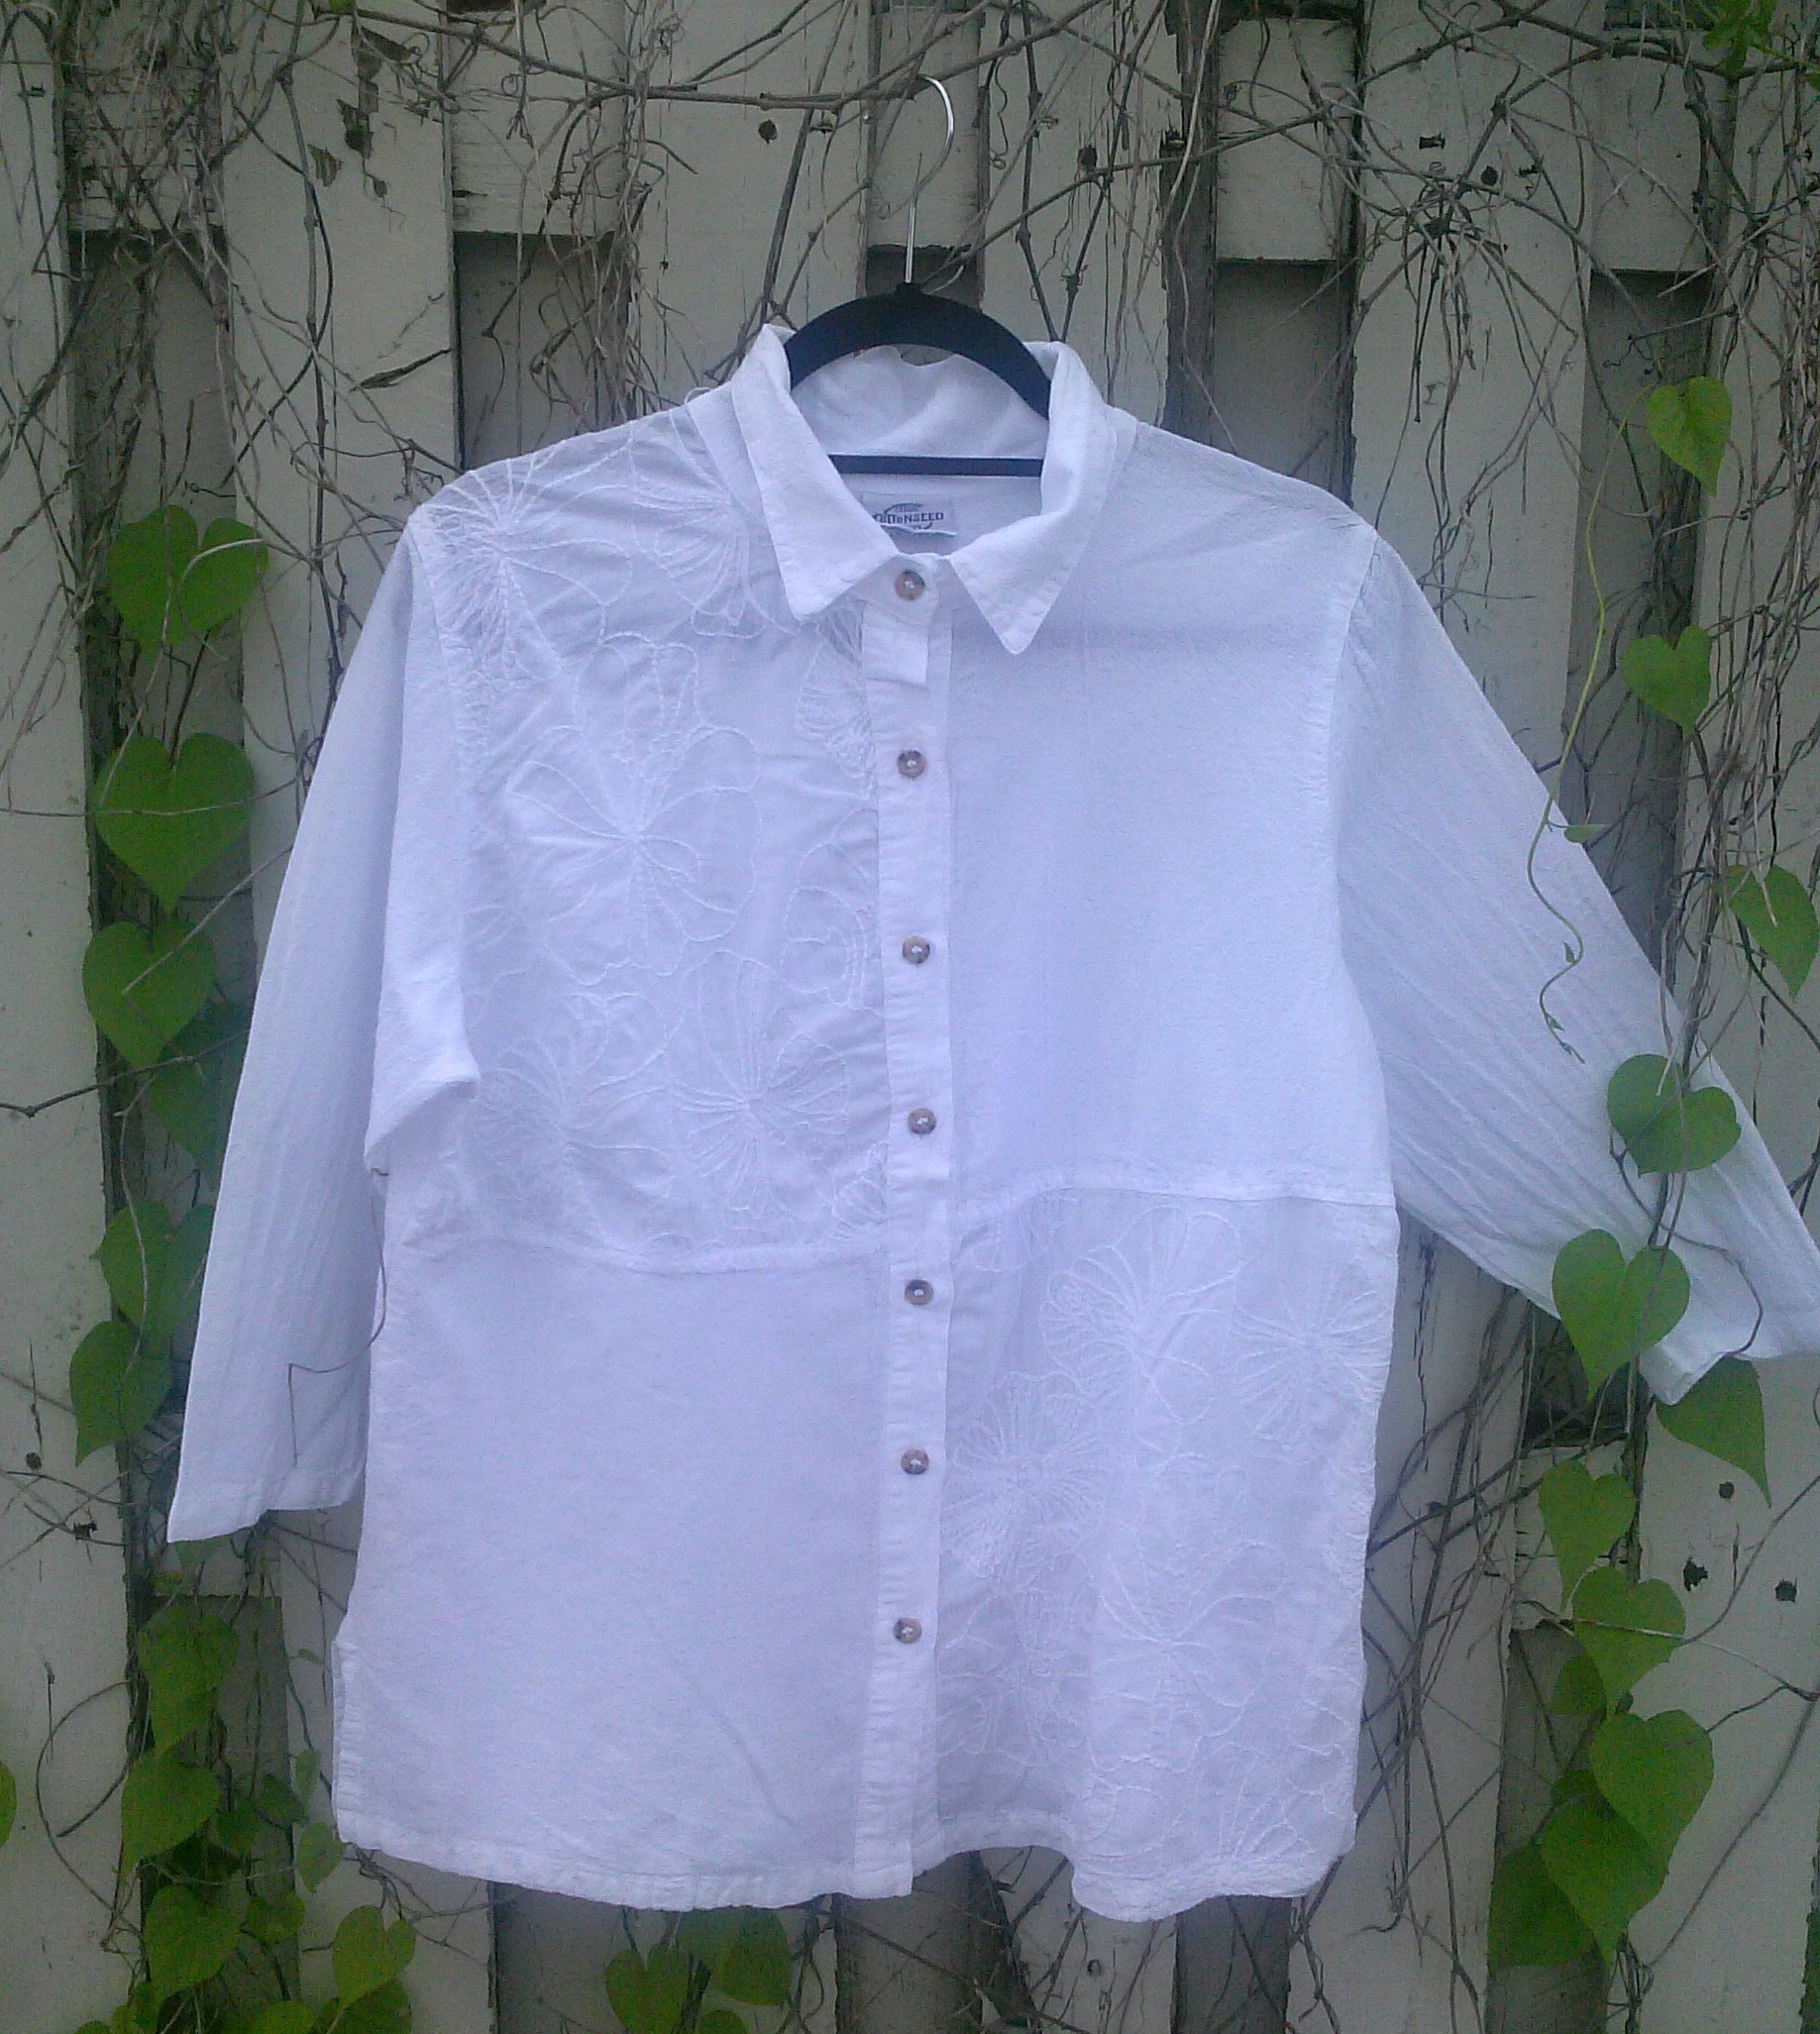 4 Panel Shirt #004 Call for colors 727 -586 -0760 | Cottonseed Casual Wear